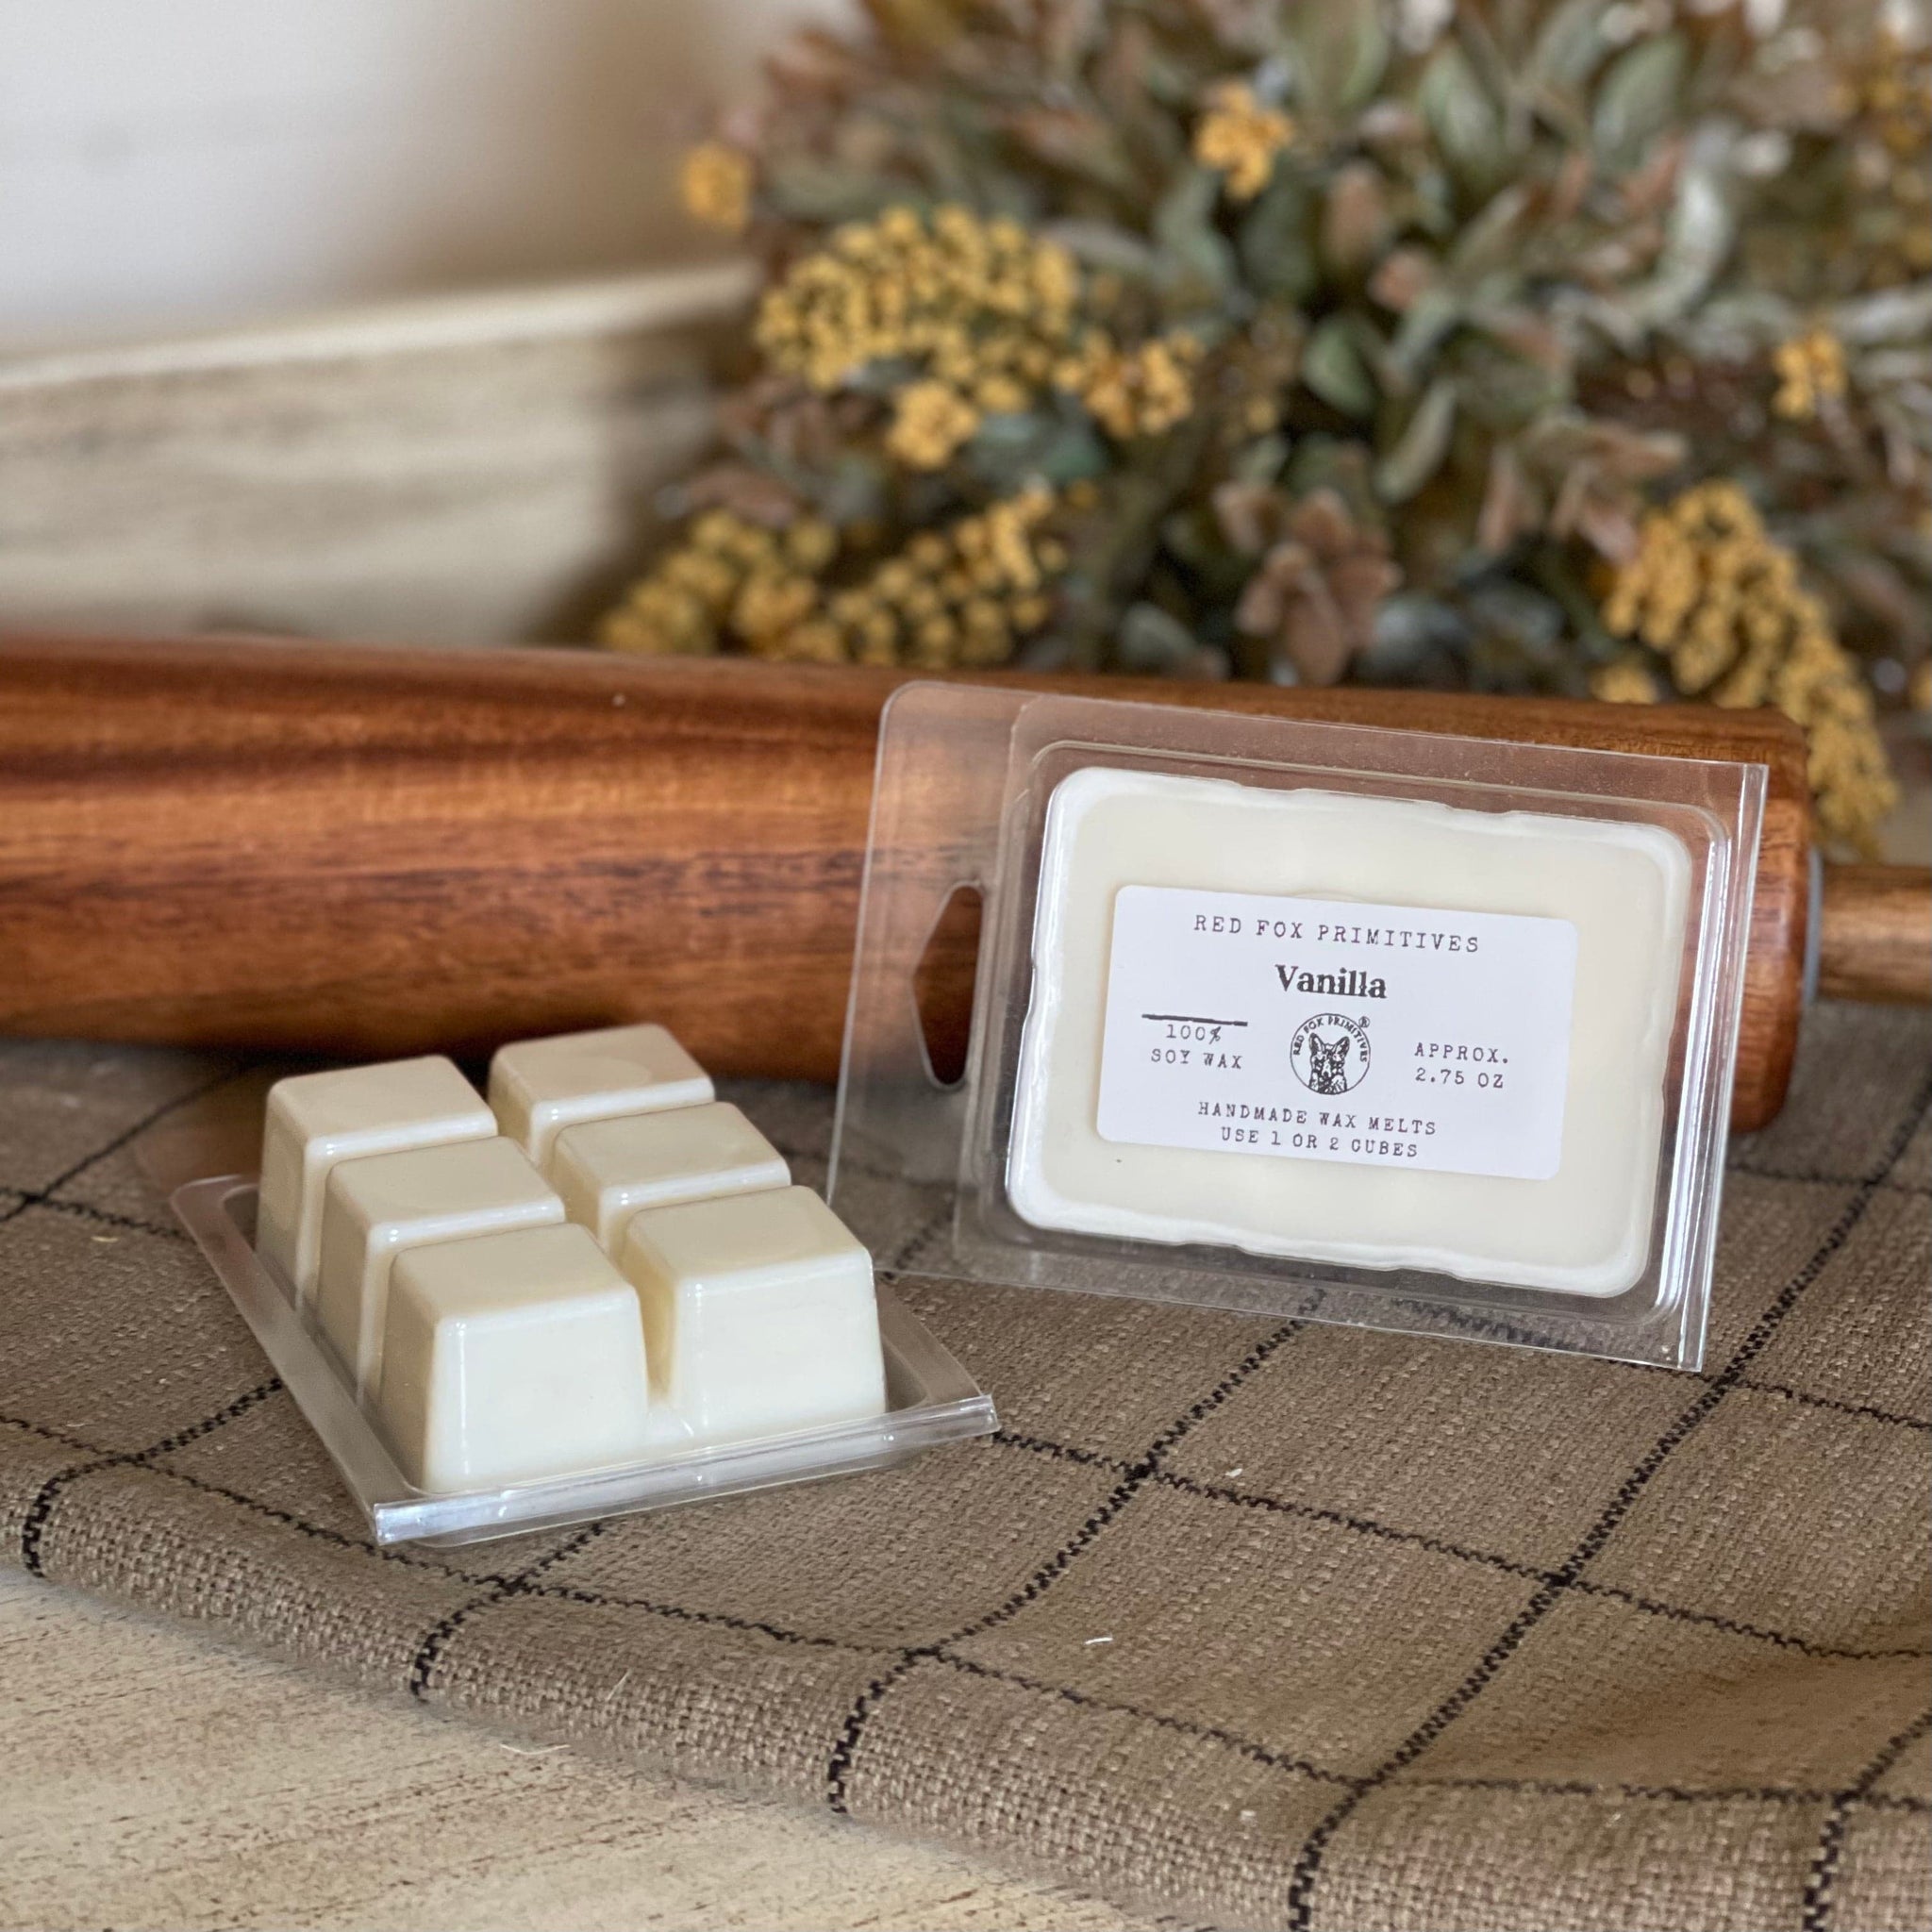 Vanilla - Soy Melt Set of 2 Best Scented Wax Melts, Candles, Fall Scents, For Sale, New, Primitive Candles, Vanilla Wax Melts, Wax Melts Vanilla - Soy Melt Set of 2 Best Scented Wax Melts, Candles, Fall Scents, For Sale, New, Primitive Candles, Vanilla Wax Melts, Wax Melts 